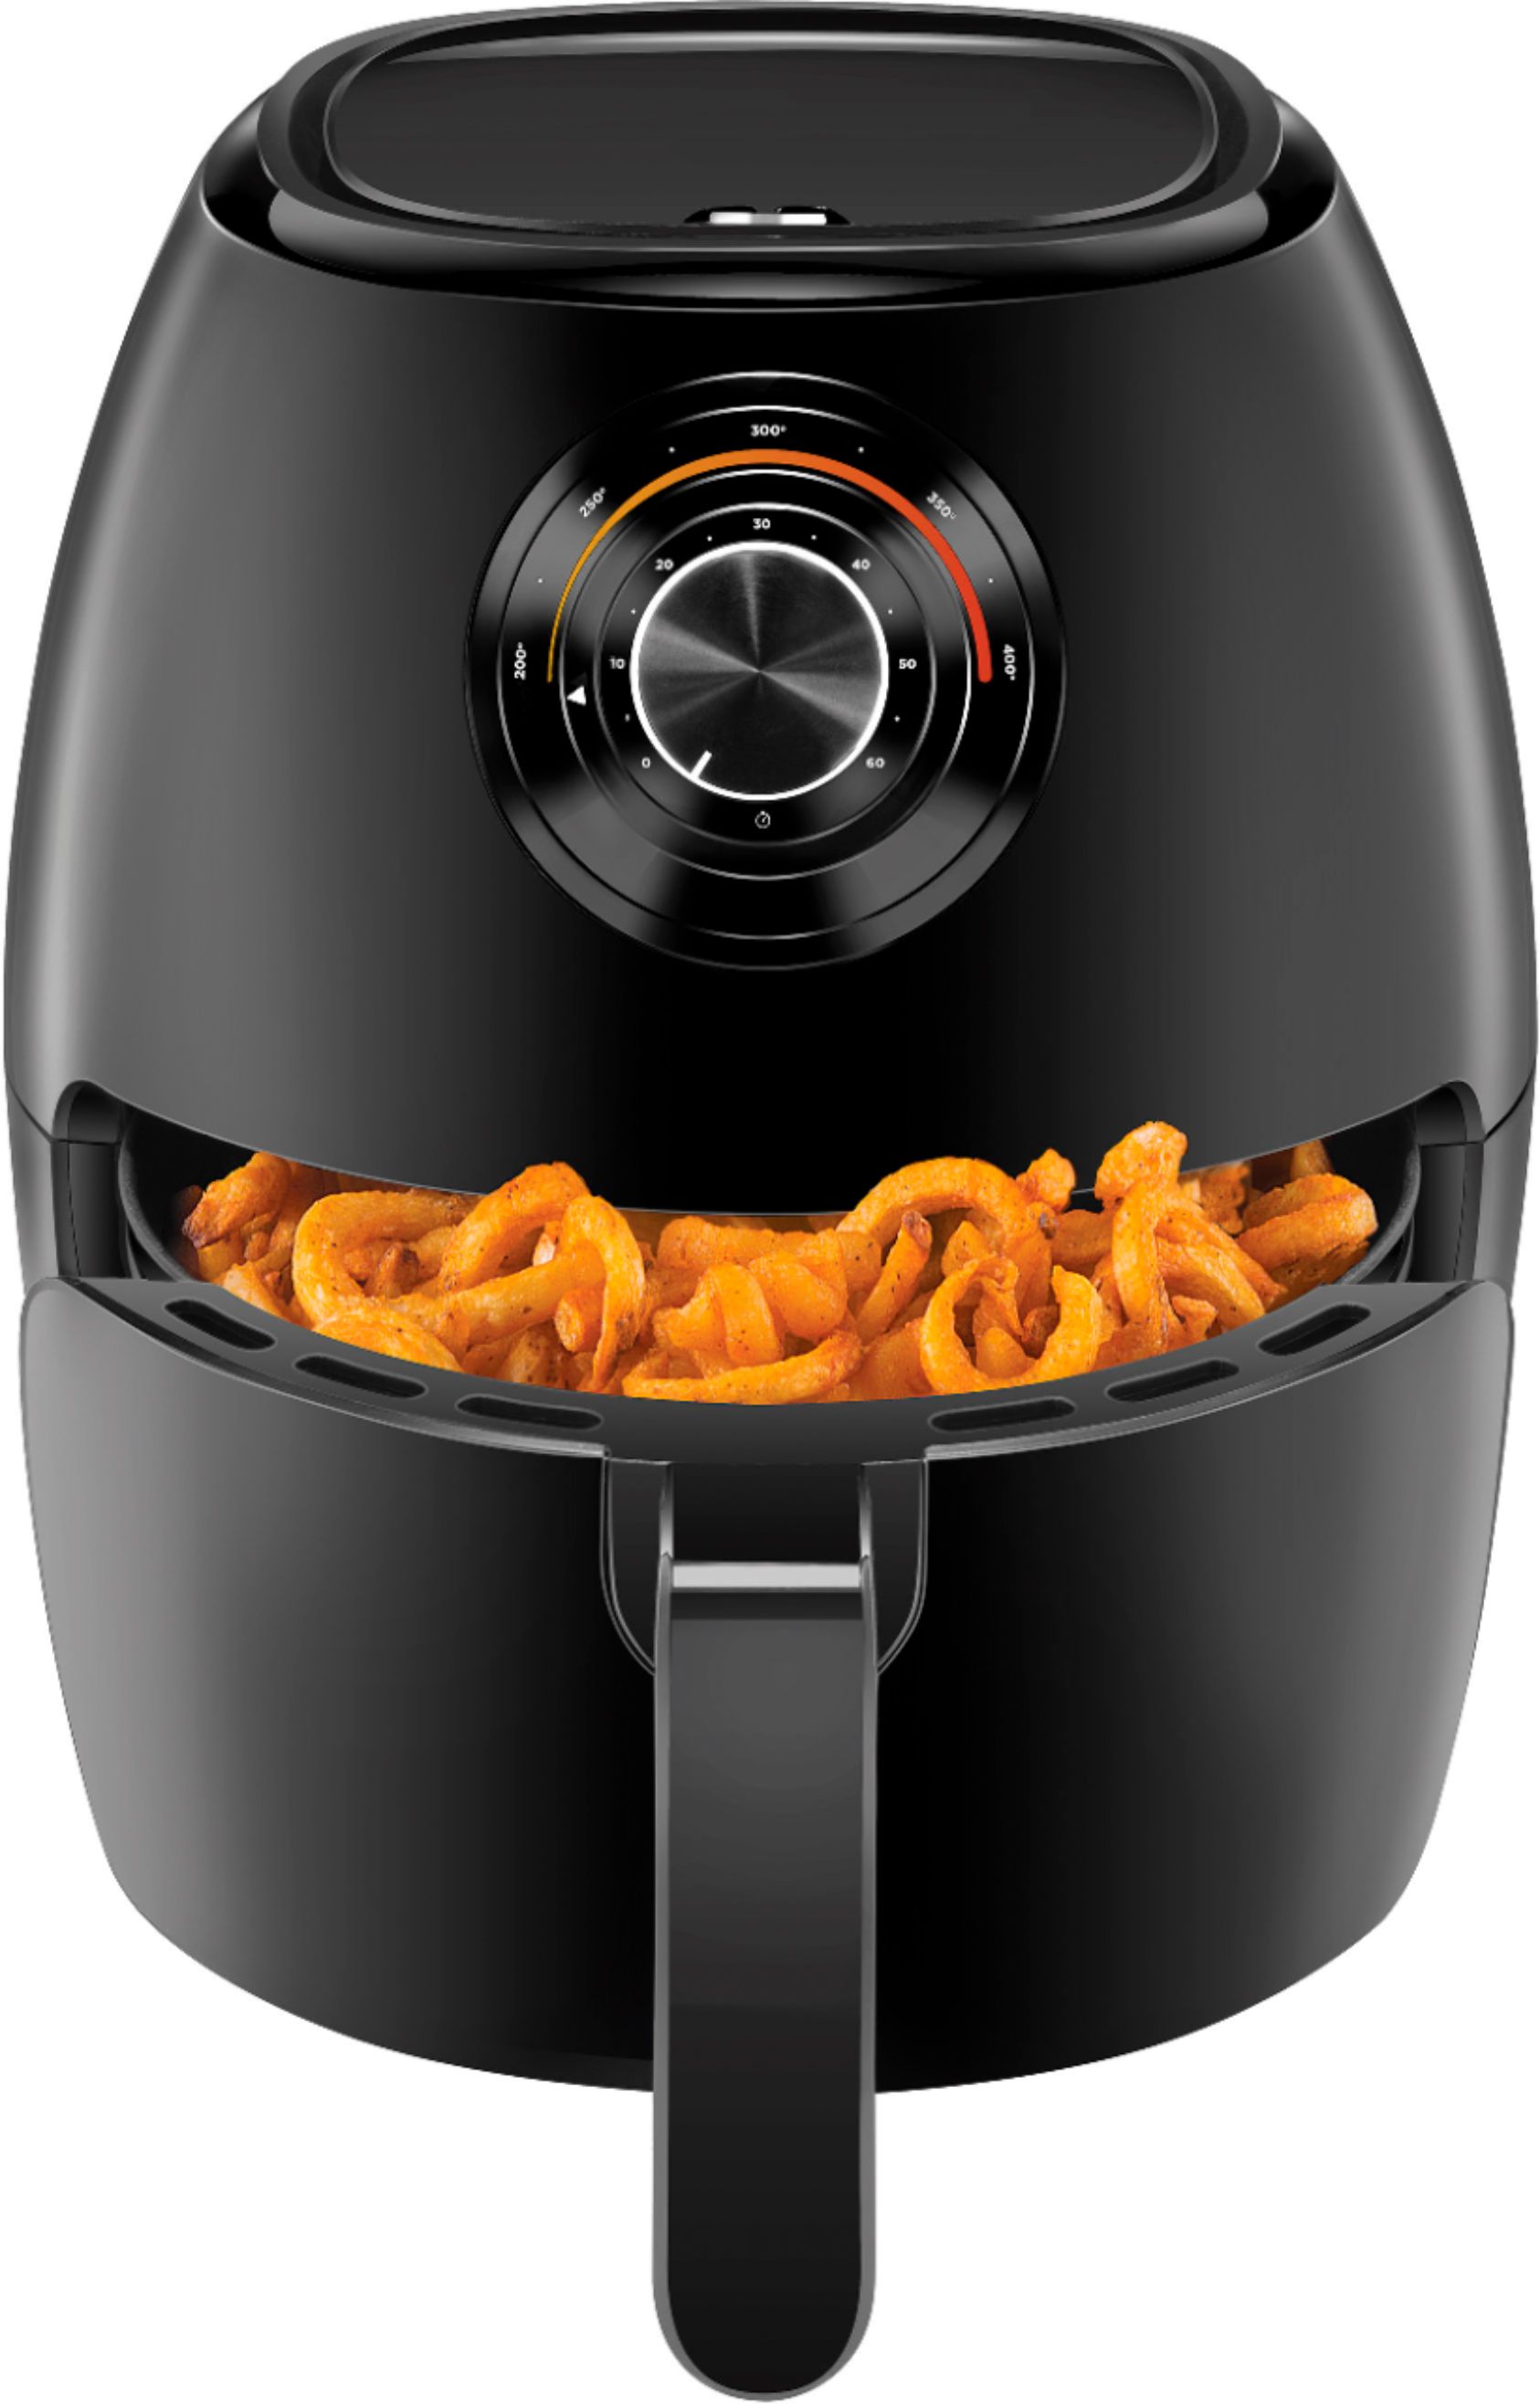 Chefman Toaster Oven Air Fryer Best Buy | All About Image HD